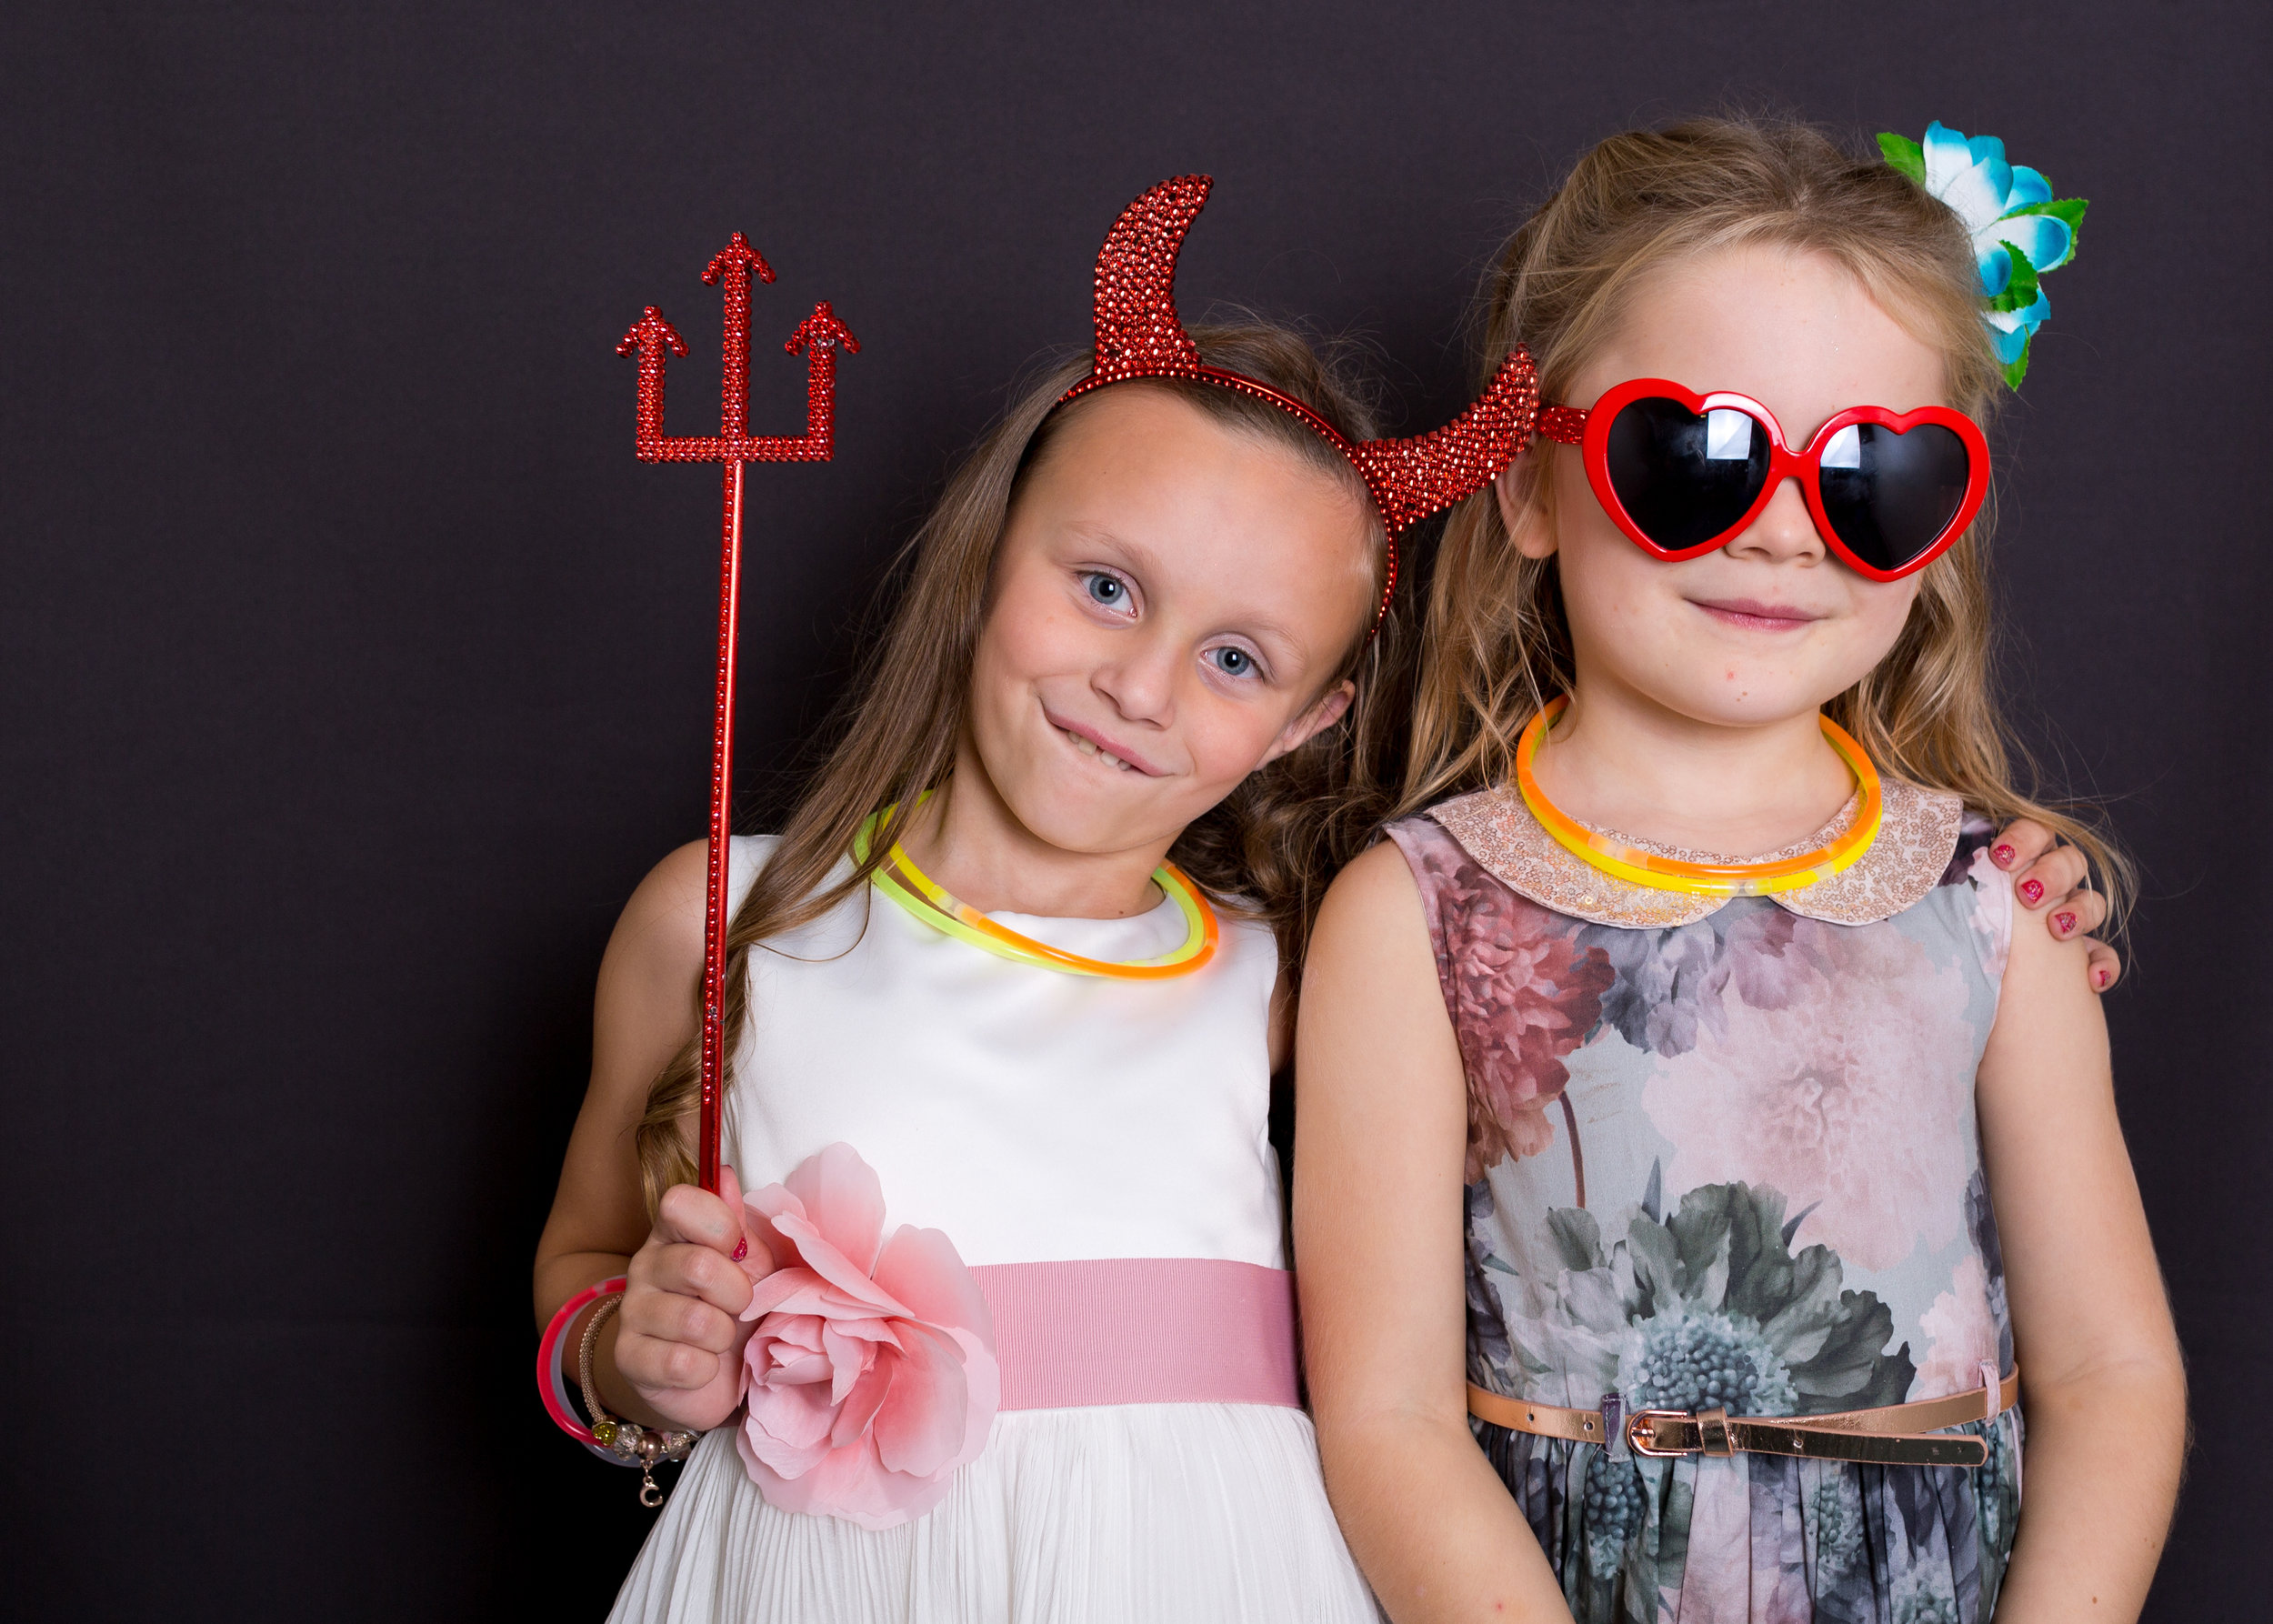 children love the Photo Booth, south wales, cardiff